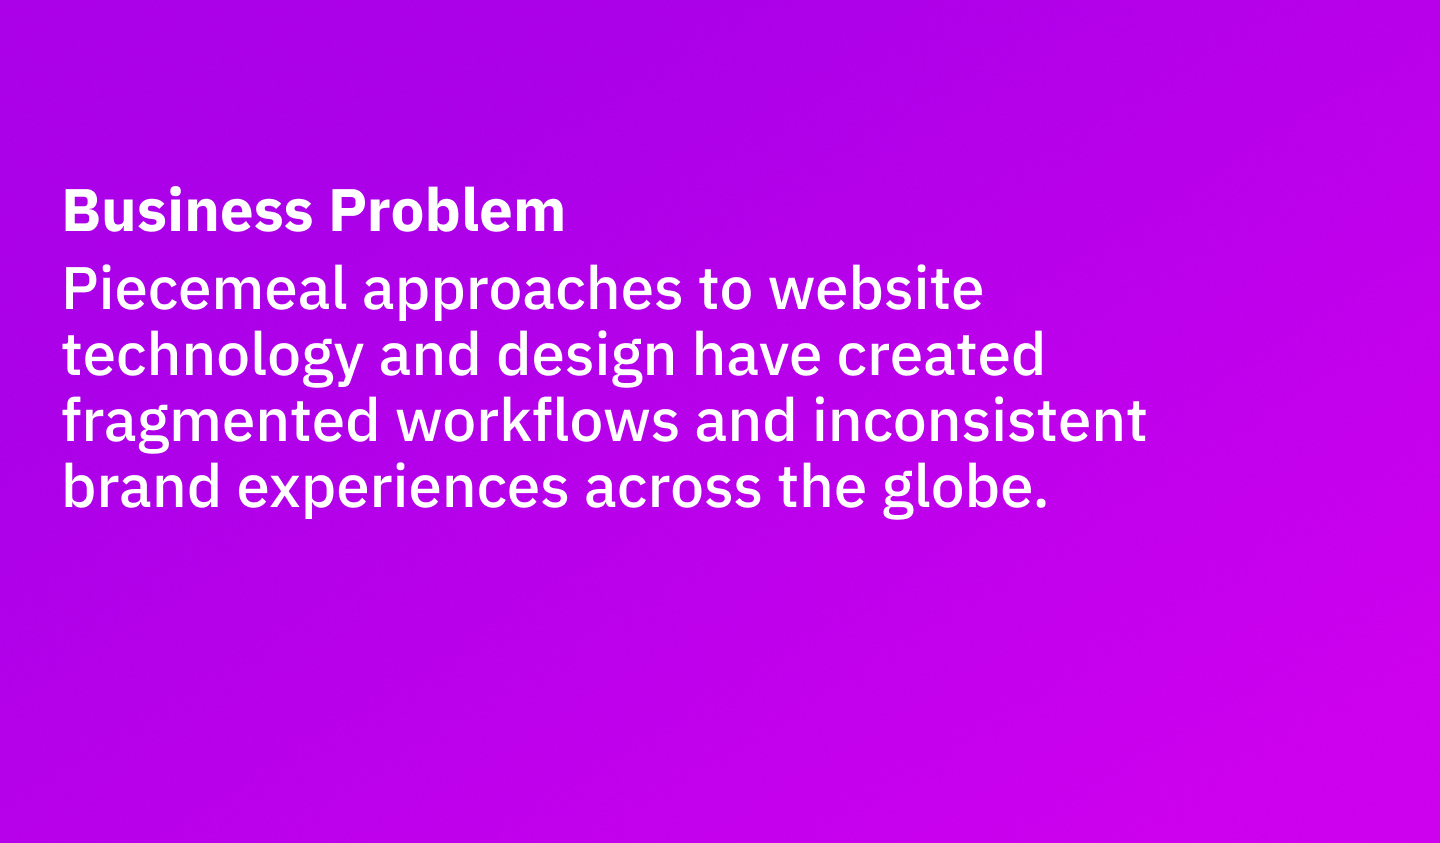 A screenshot of a presentation slide that reads: 'Business Problem - Piecemeal approaches to website technology and design have created fragmented workflows and inconsistent brand experiences across the globe.'